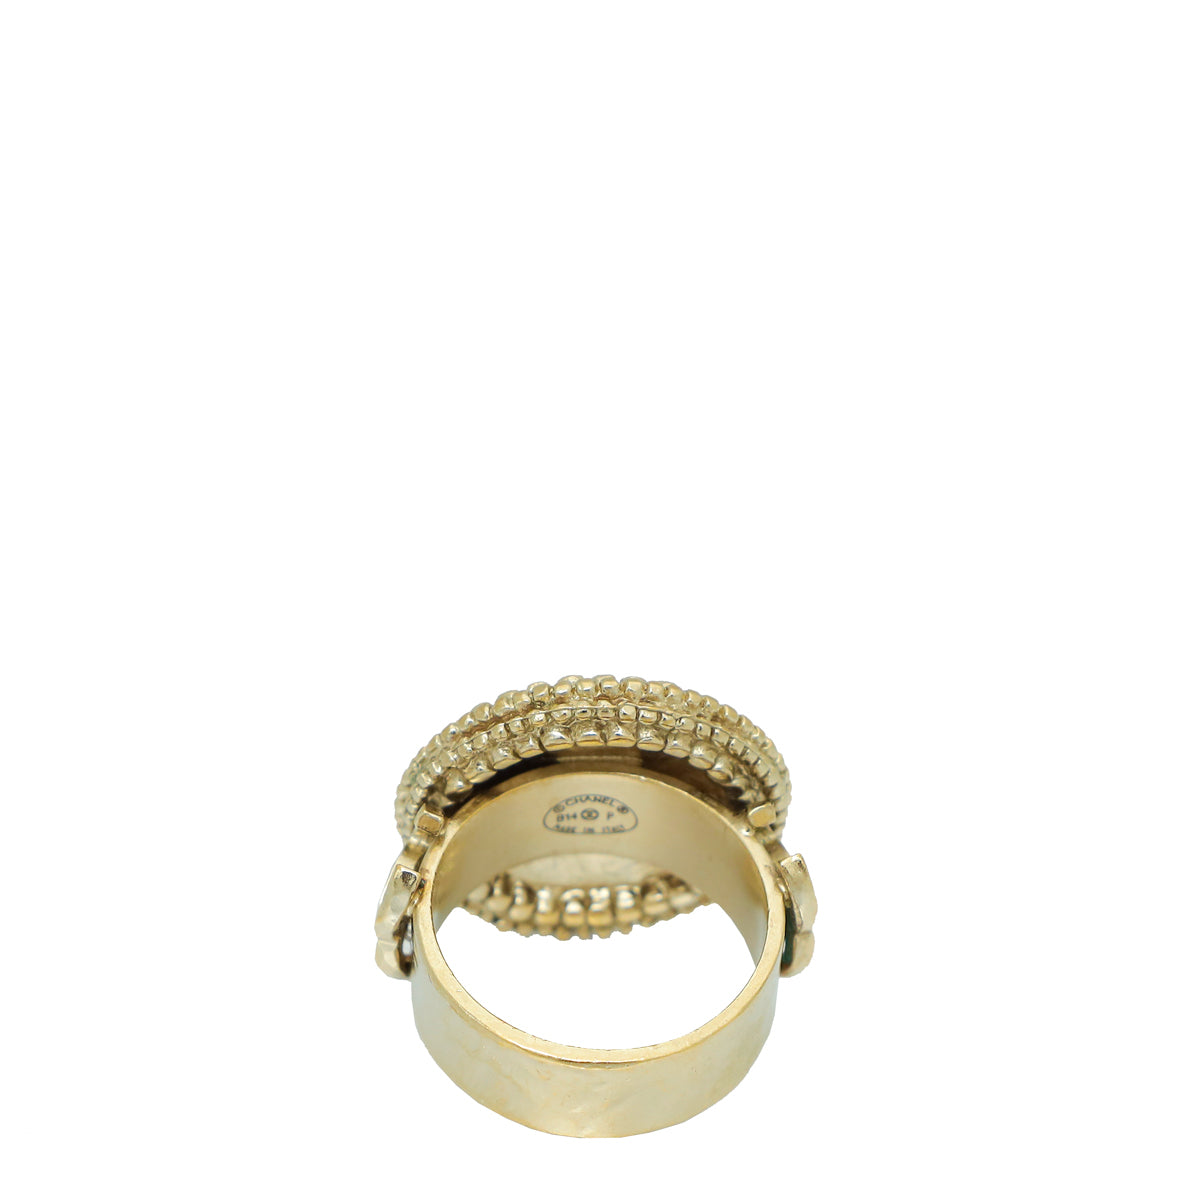 Chanel Gold CC Camellia Flower Small Ring 50